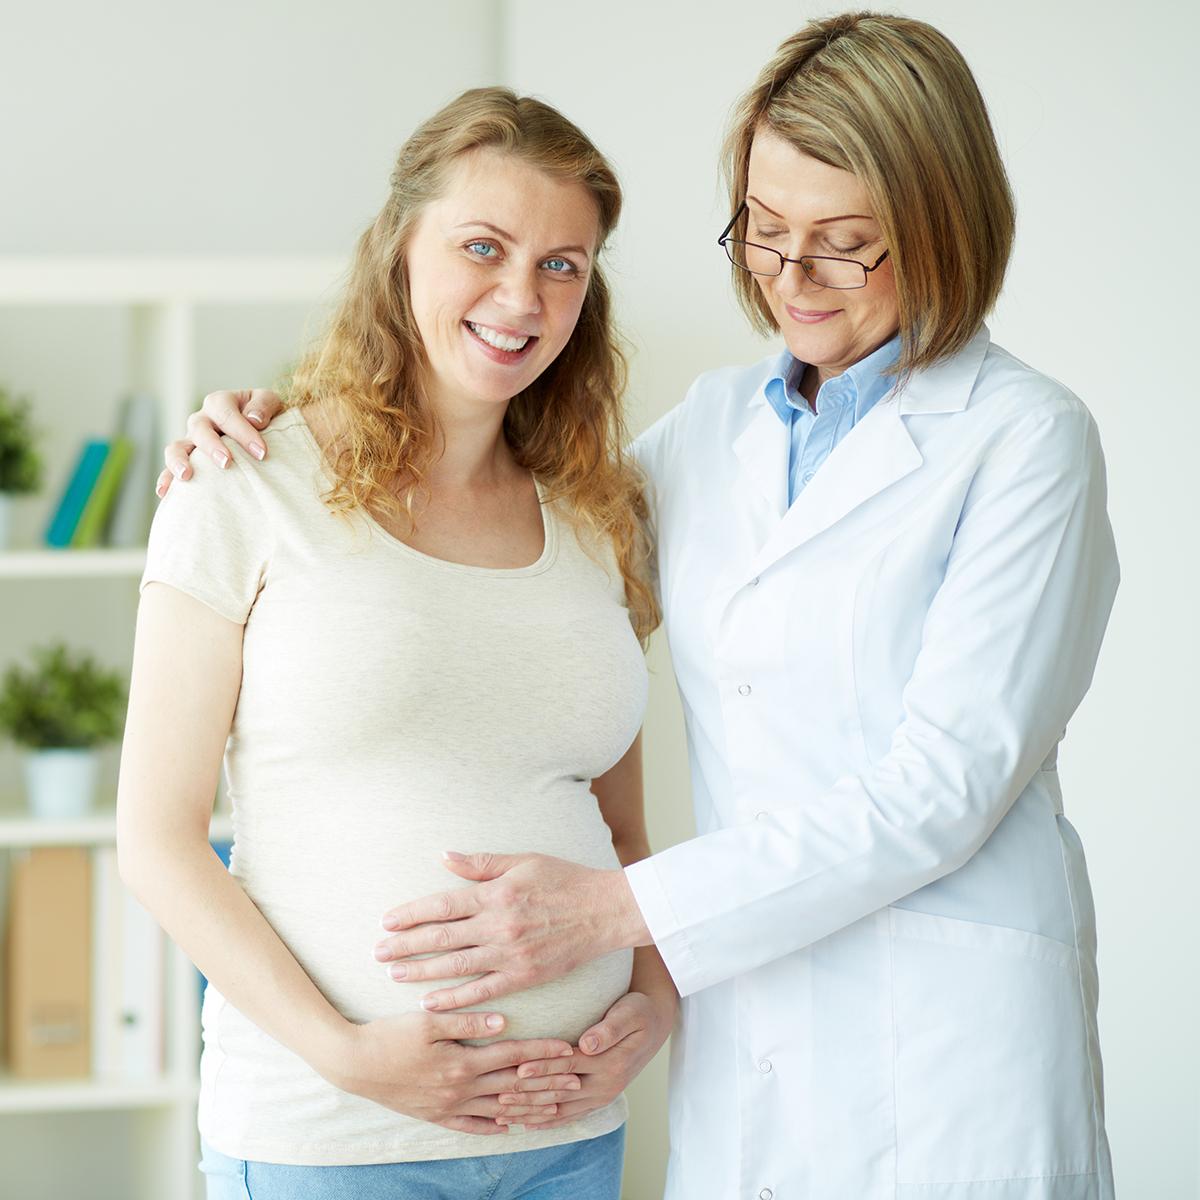 Pregnant woman - Birth Defects Prevention Option